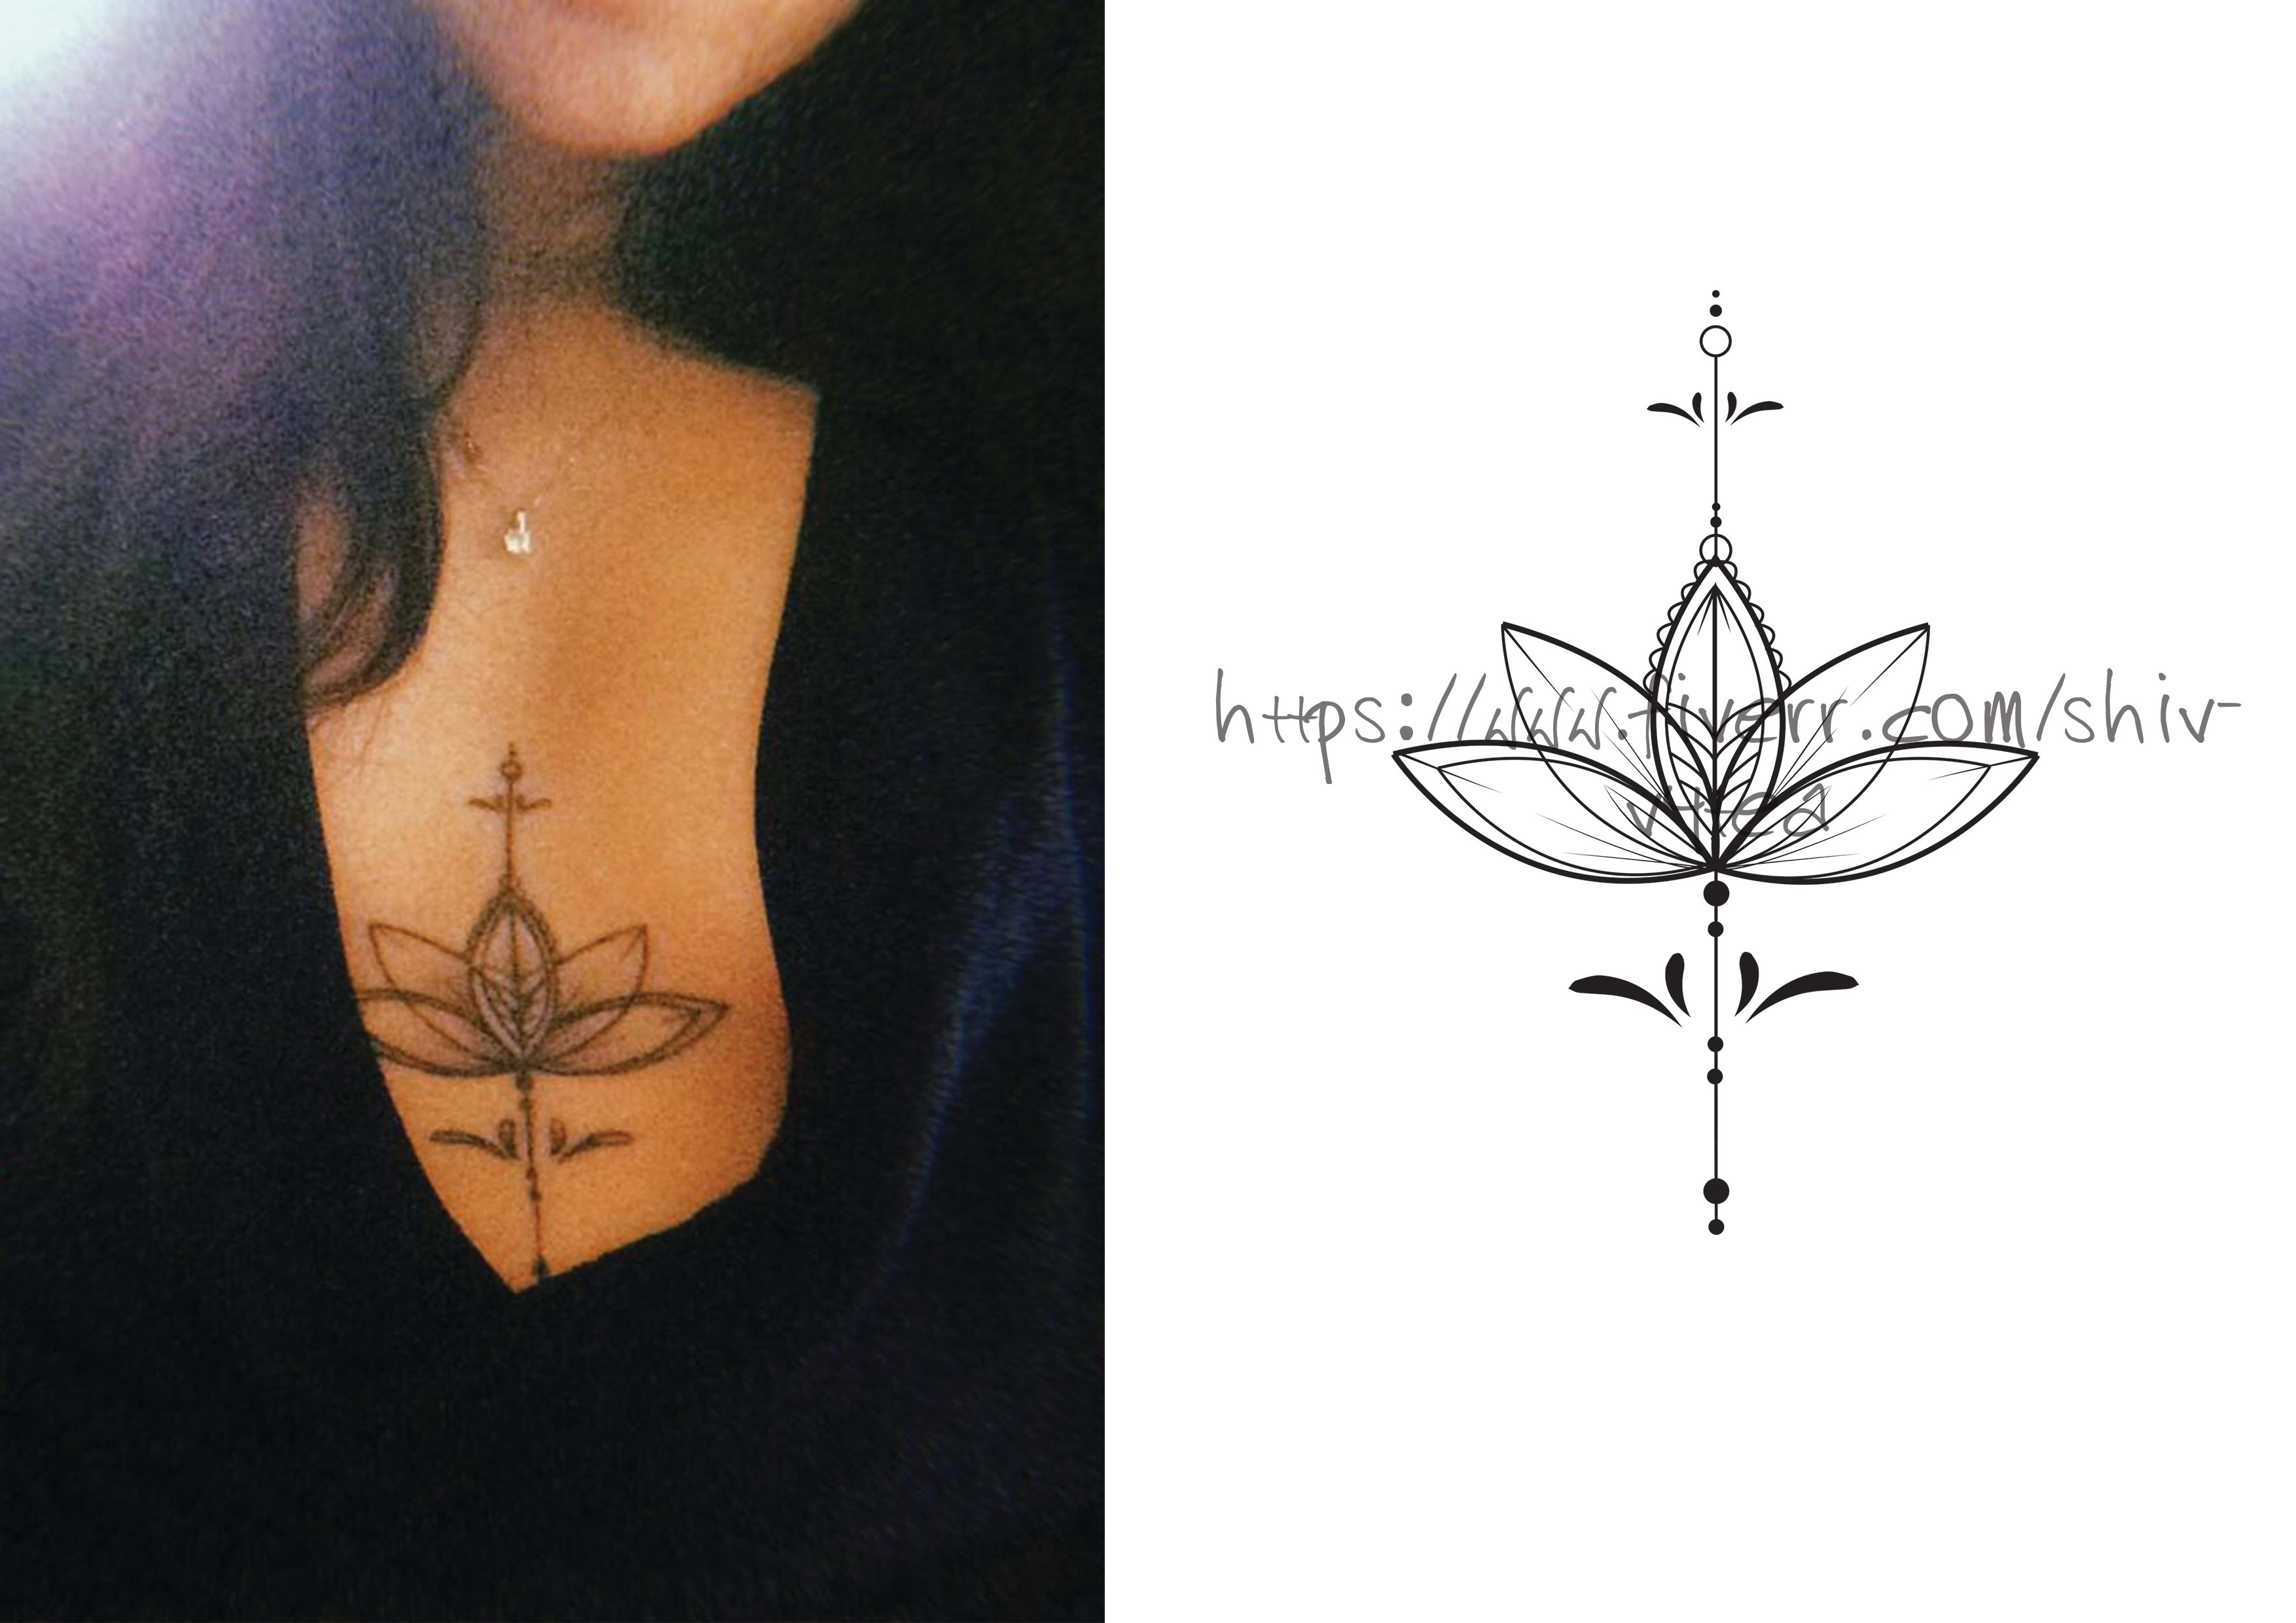 Design sternum tattoo for you by Shivvytea | Fiverr